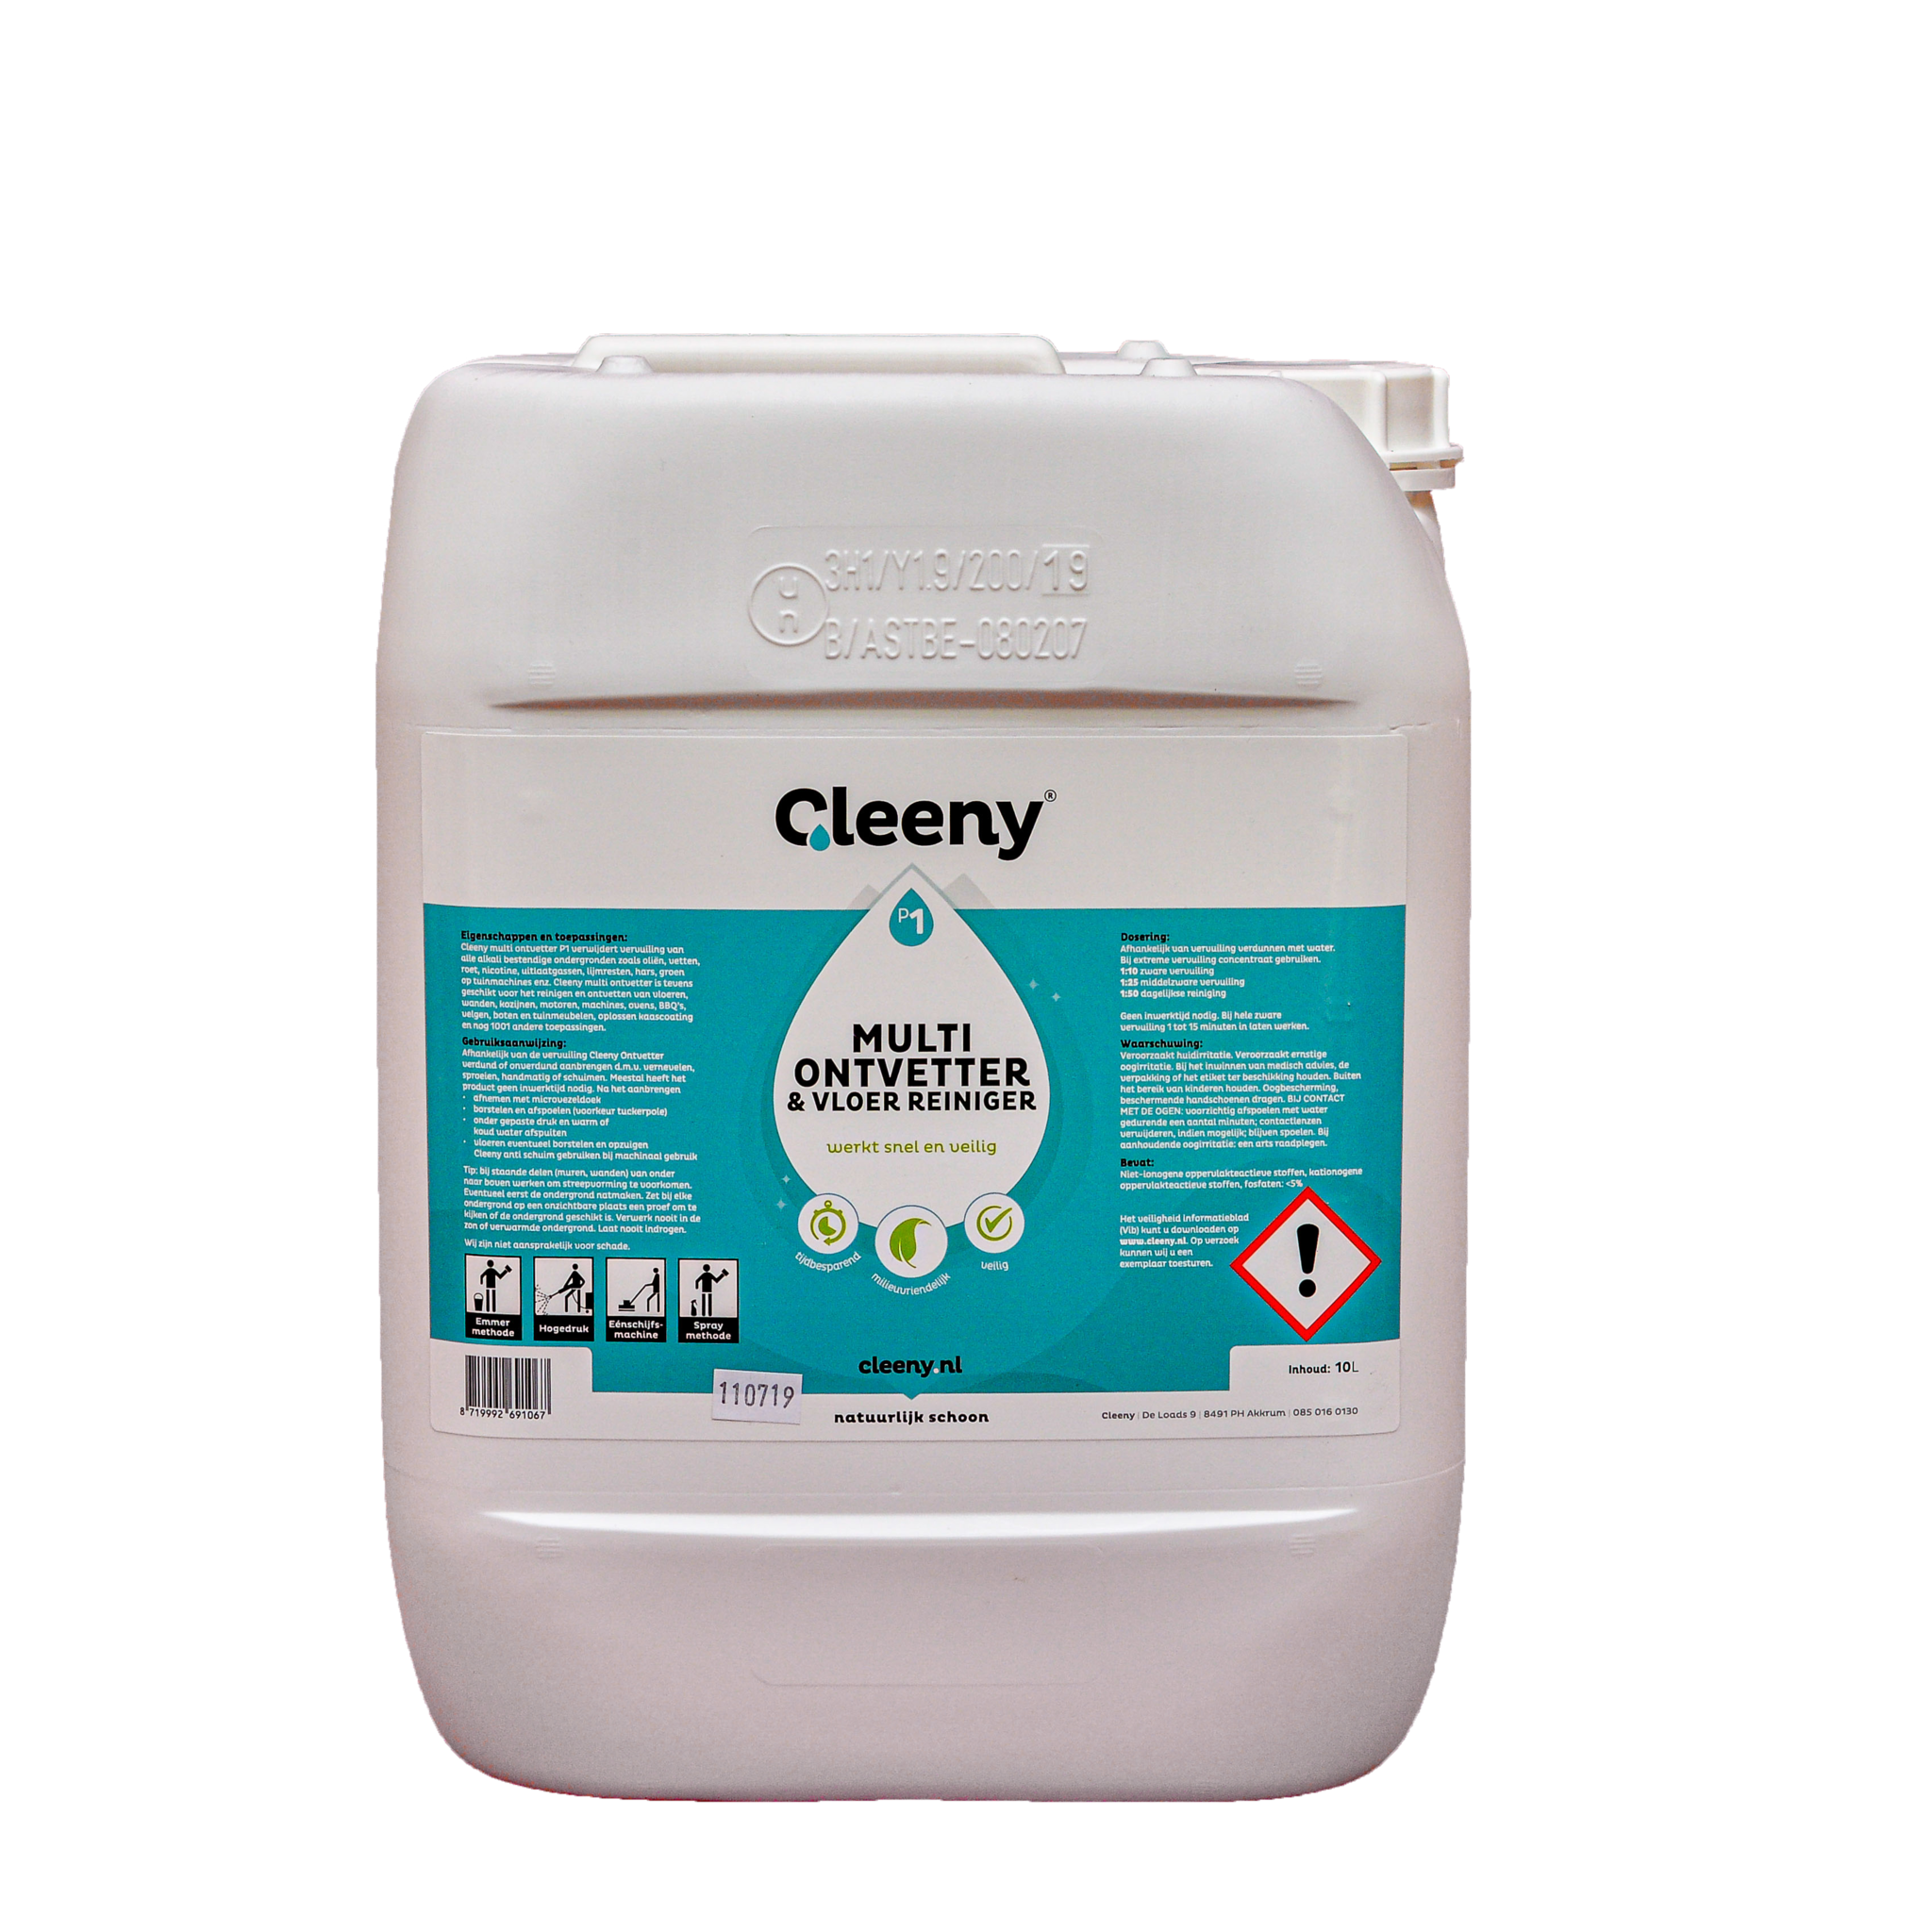 Cleeny Cleeny P1 ontvetter, 10 liter kan concentraat